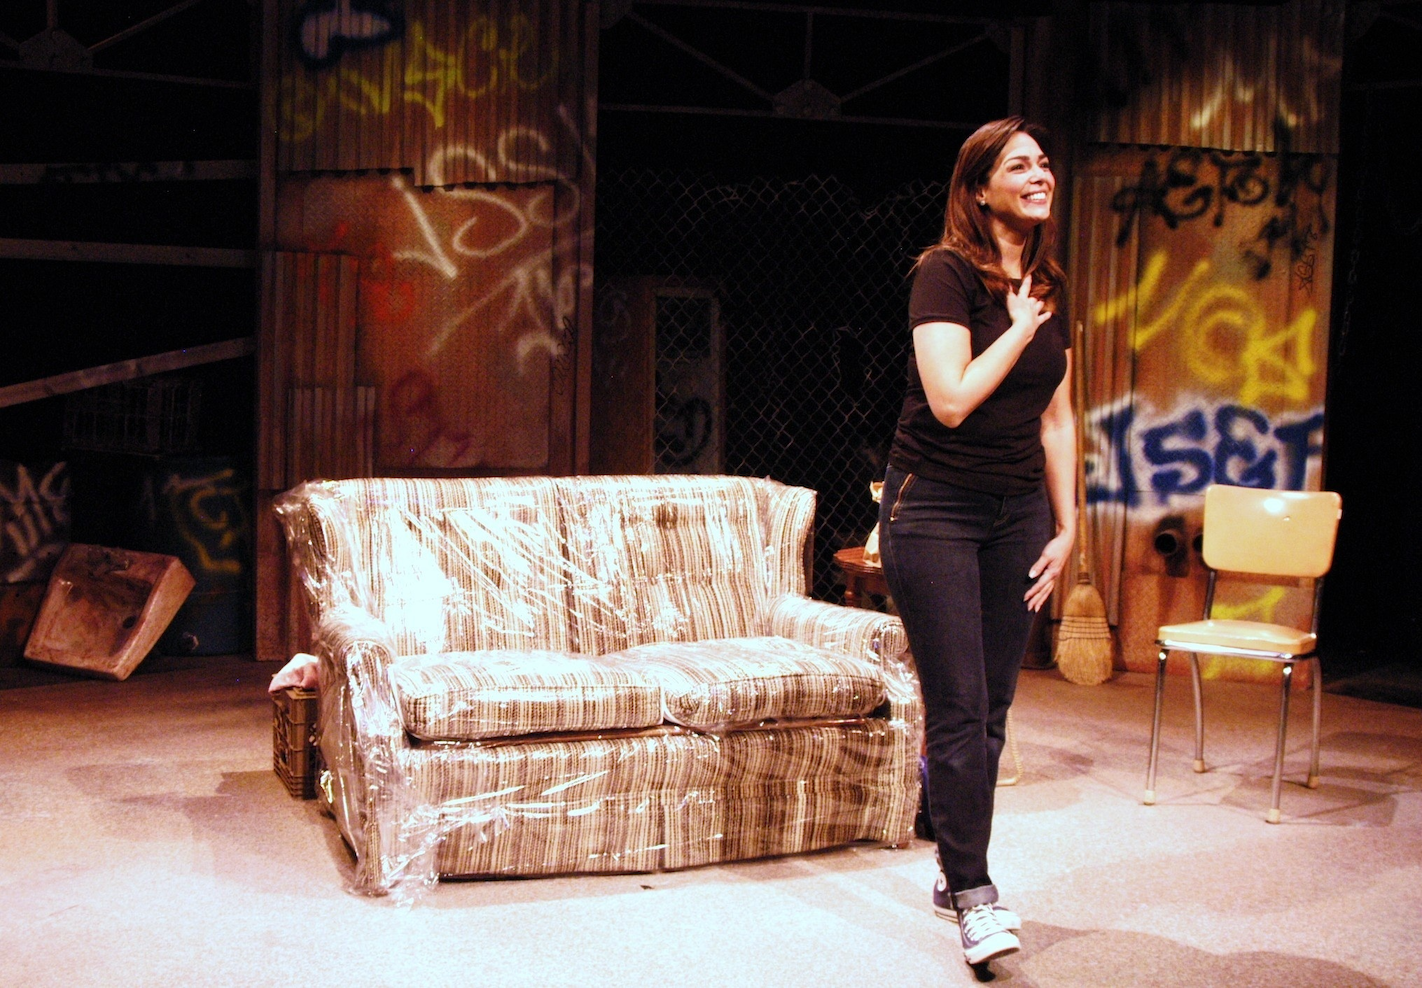 Elaine Del Valle in her previous stage performances of "Brownsville Bred"